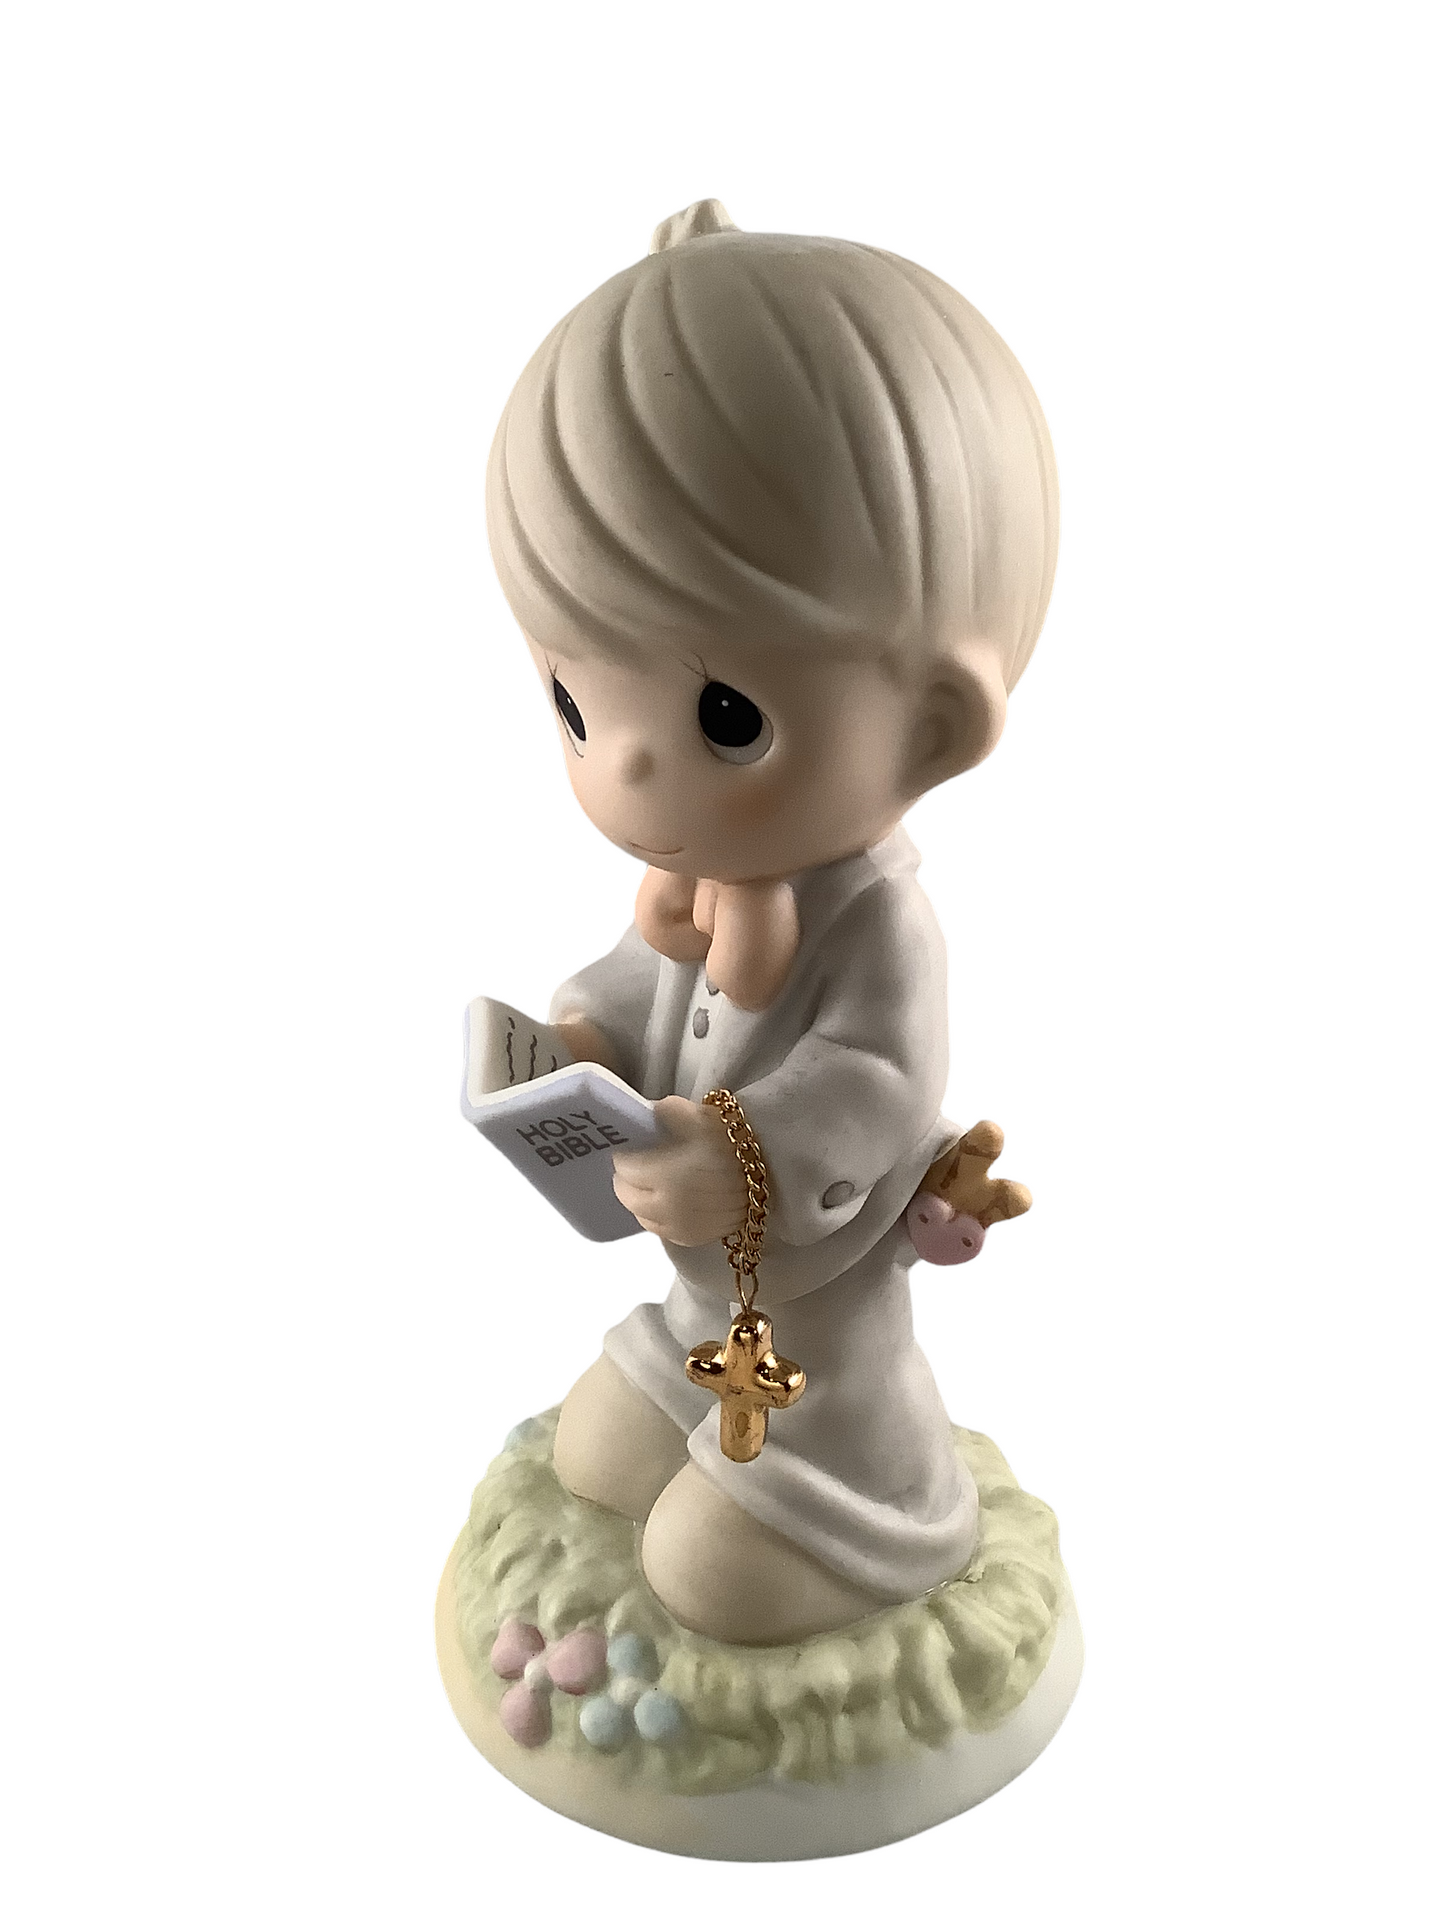 This Day Has Been Made In Heaven - Precious Moment Figurine